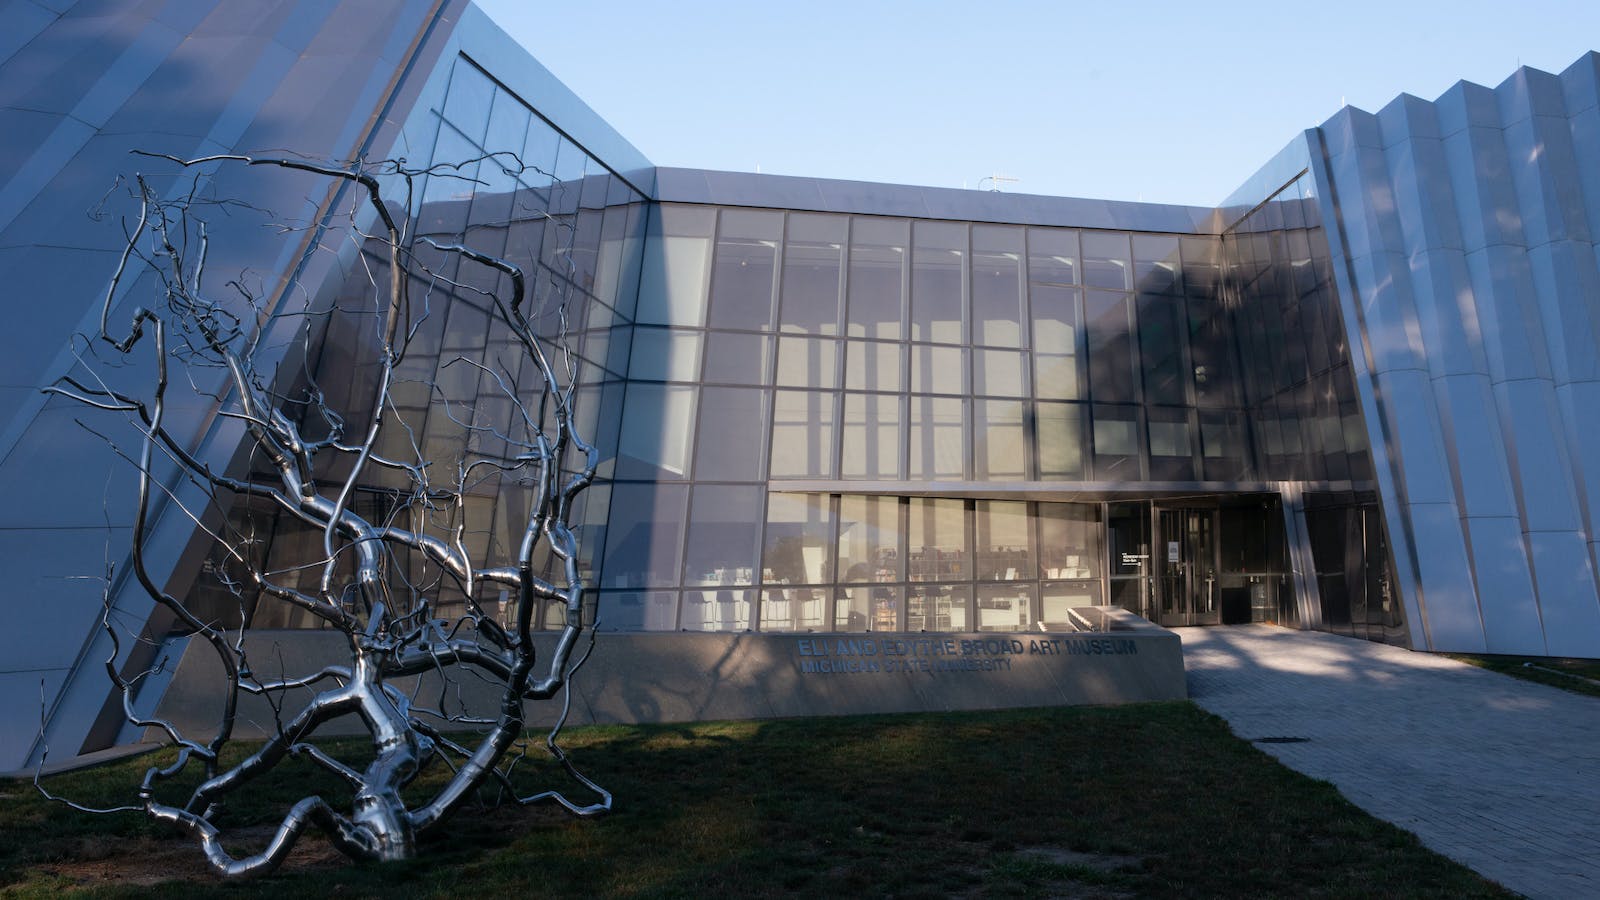 Msu broad art museum celebrates years with special events through november